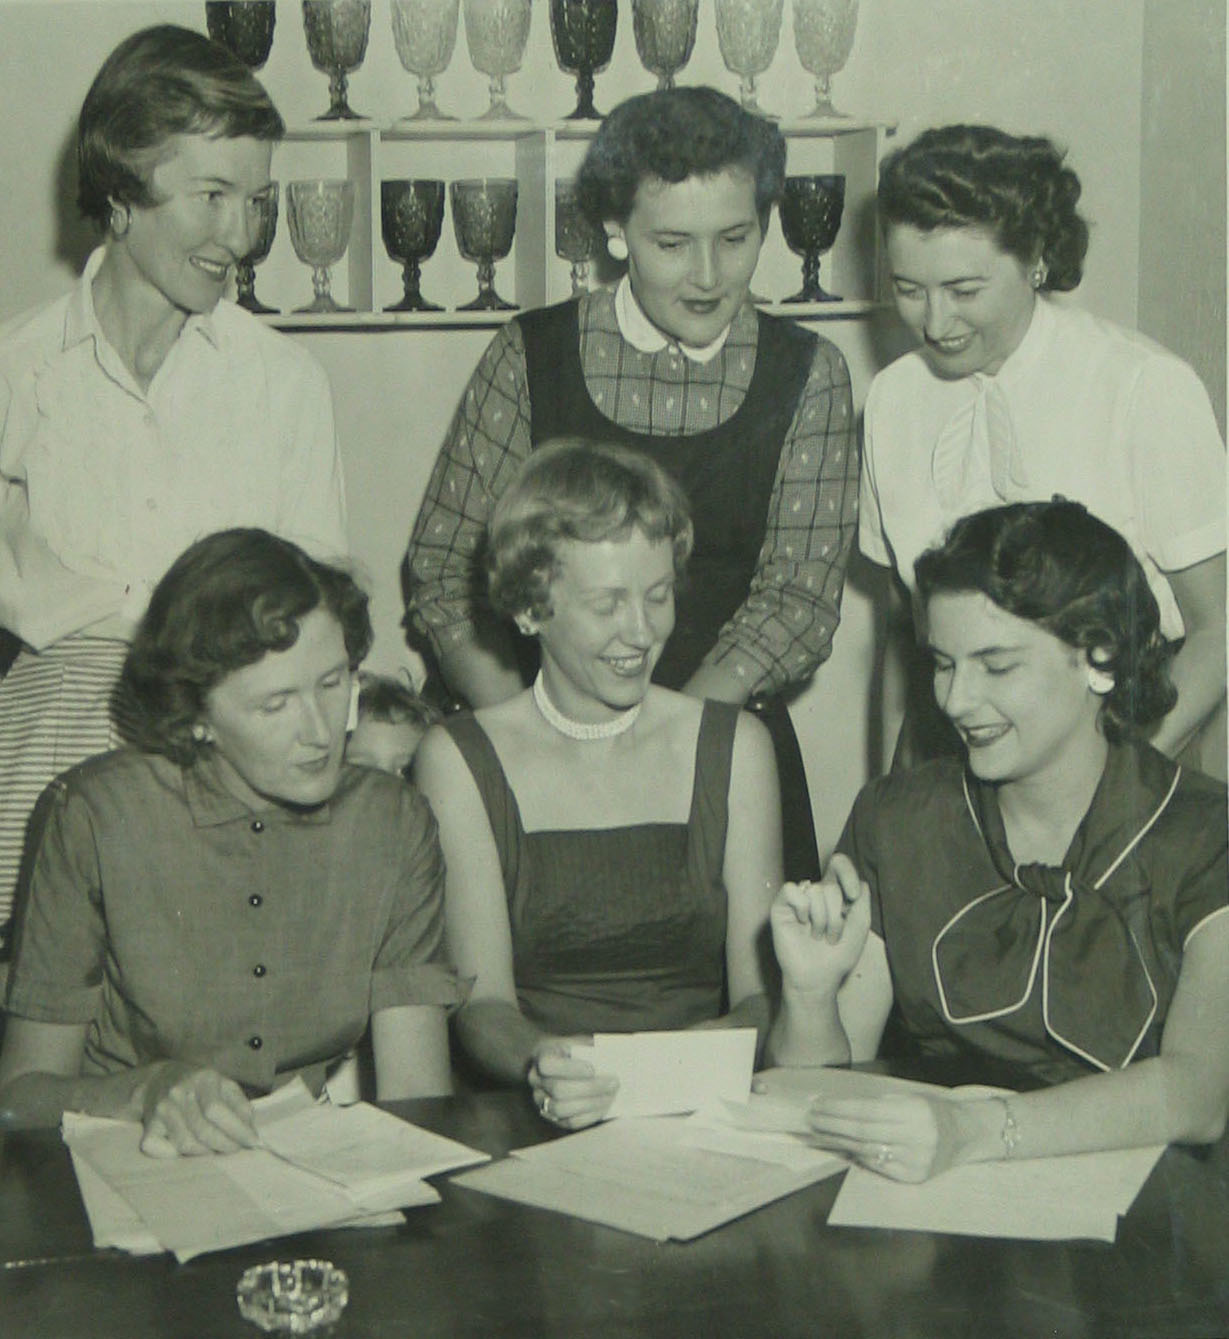 Newly elected officers of the Junior Welfare League (standing) Ethel Kirchner, Dorothy Heritage, MaryAnn Hoyt (seated) Anita O’Connor, Suzanne Bissell and Bitsy Robertson review the just-adopted bylaws on April 2, 1957.